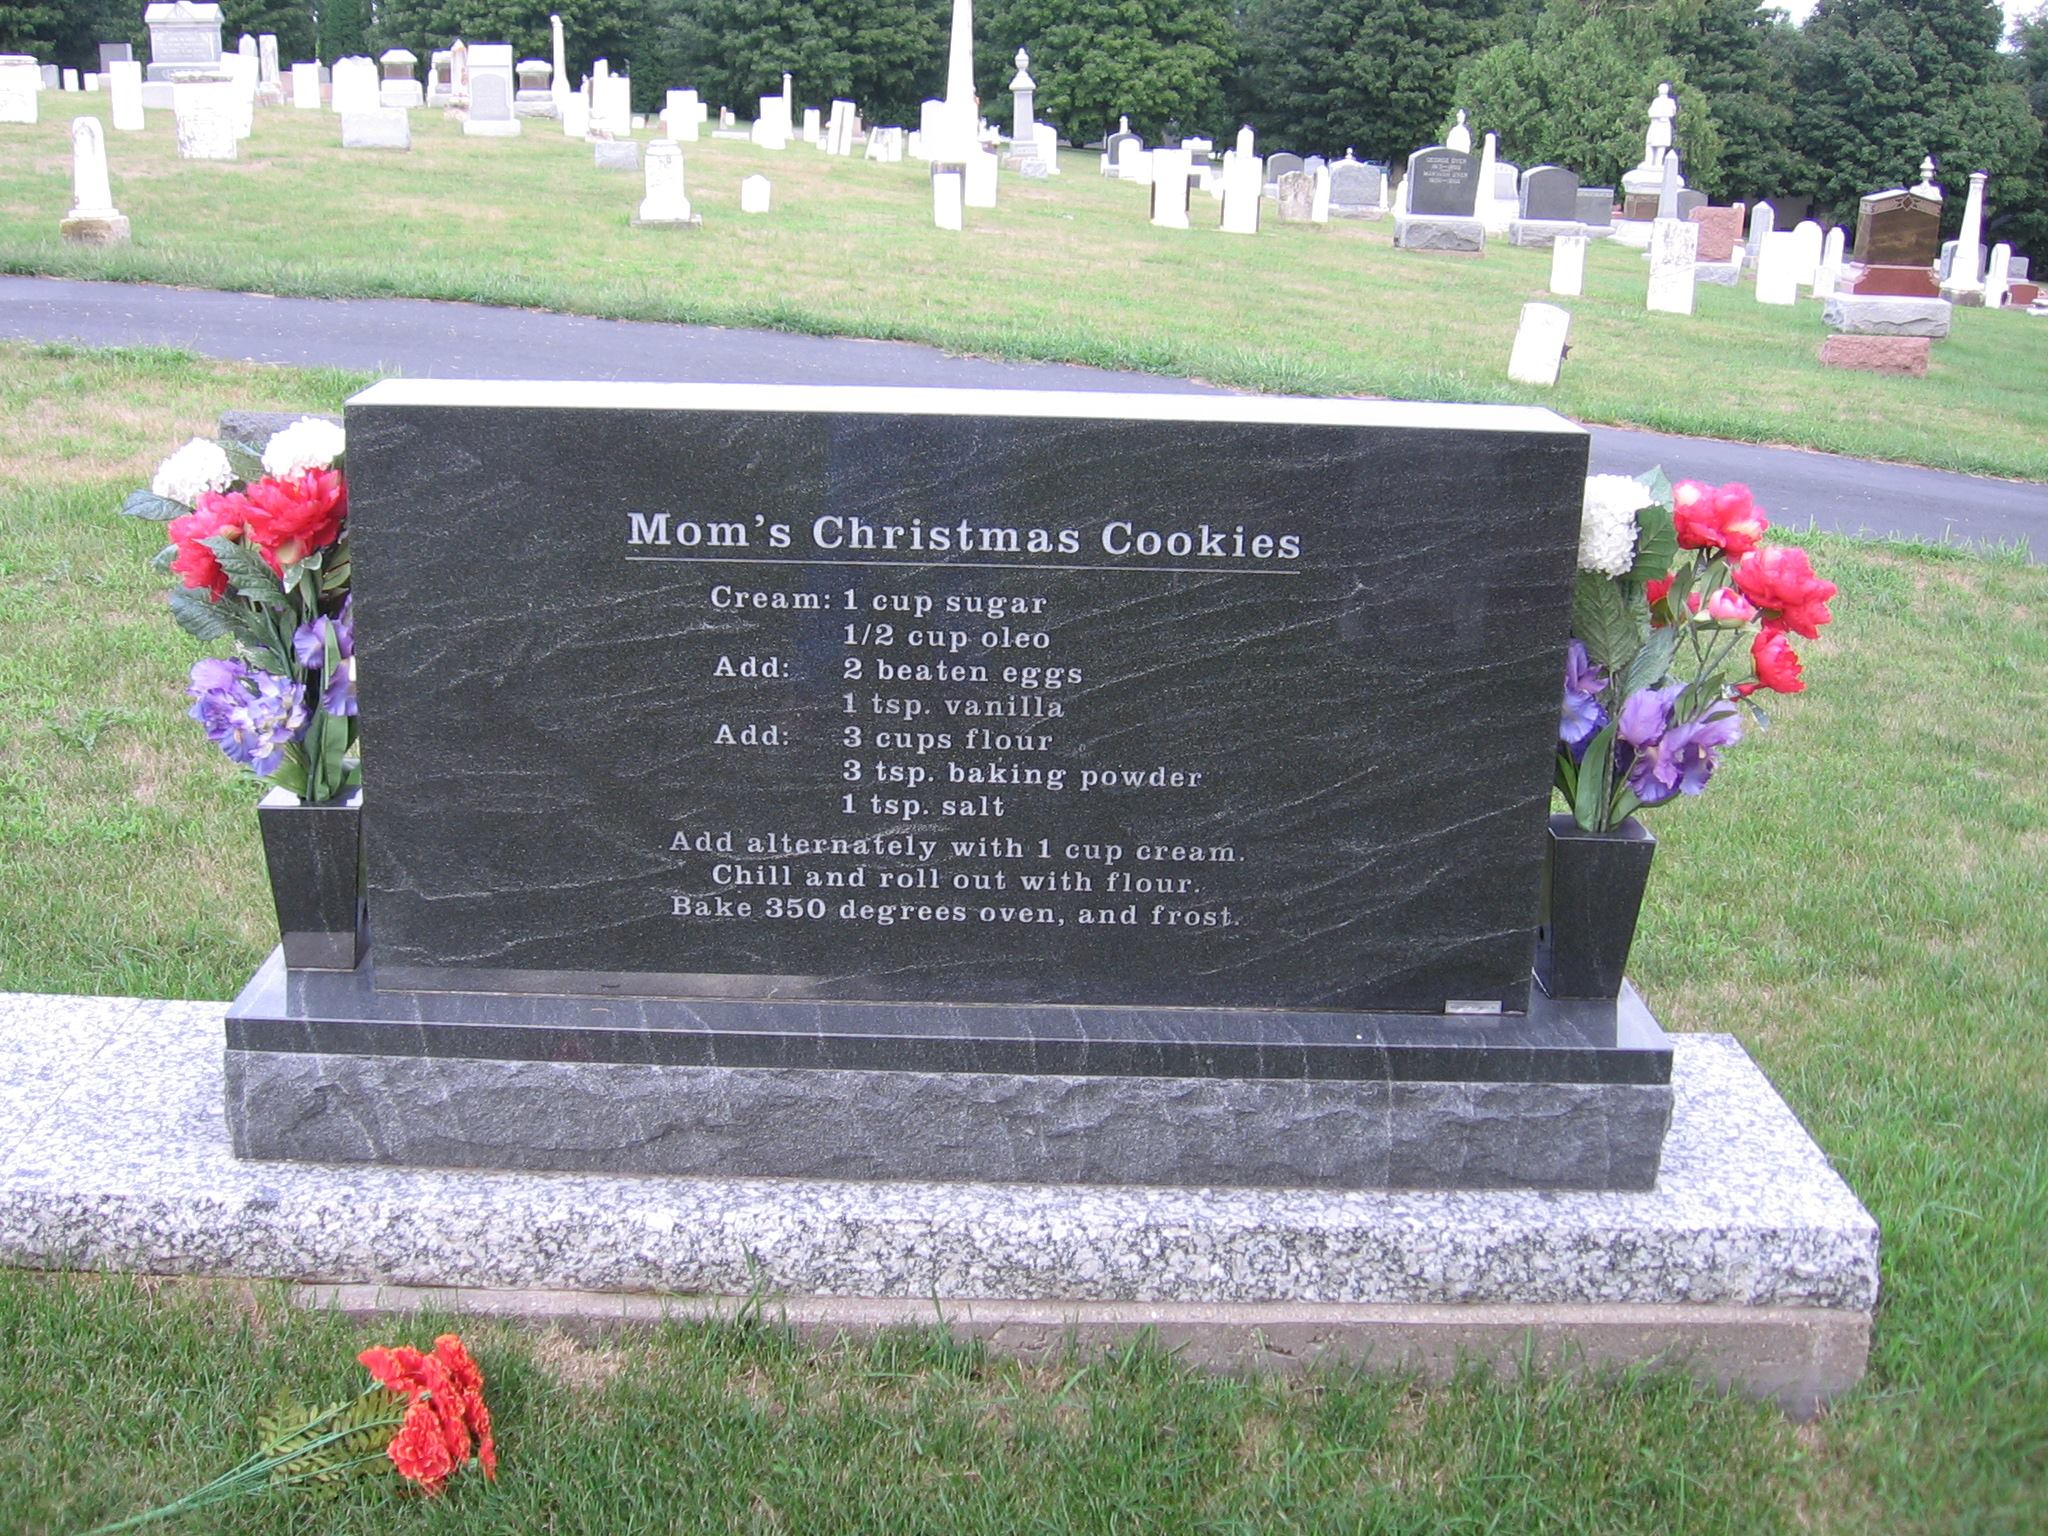 over my dead body cookie recipe - Mom's Christmas Cookies Cream 1 cup sugar 12 cup oleo Add 2 beaten Kes 1 tsp. Vanilla Add 3 cups flour 3 tsp baking powder 1 tsp. salt Add alternately with 1 cup cream Chill and roll out with flour Bake 350 degrees oven, 